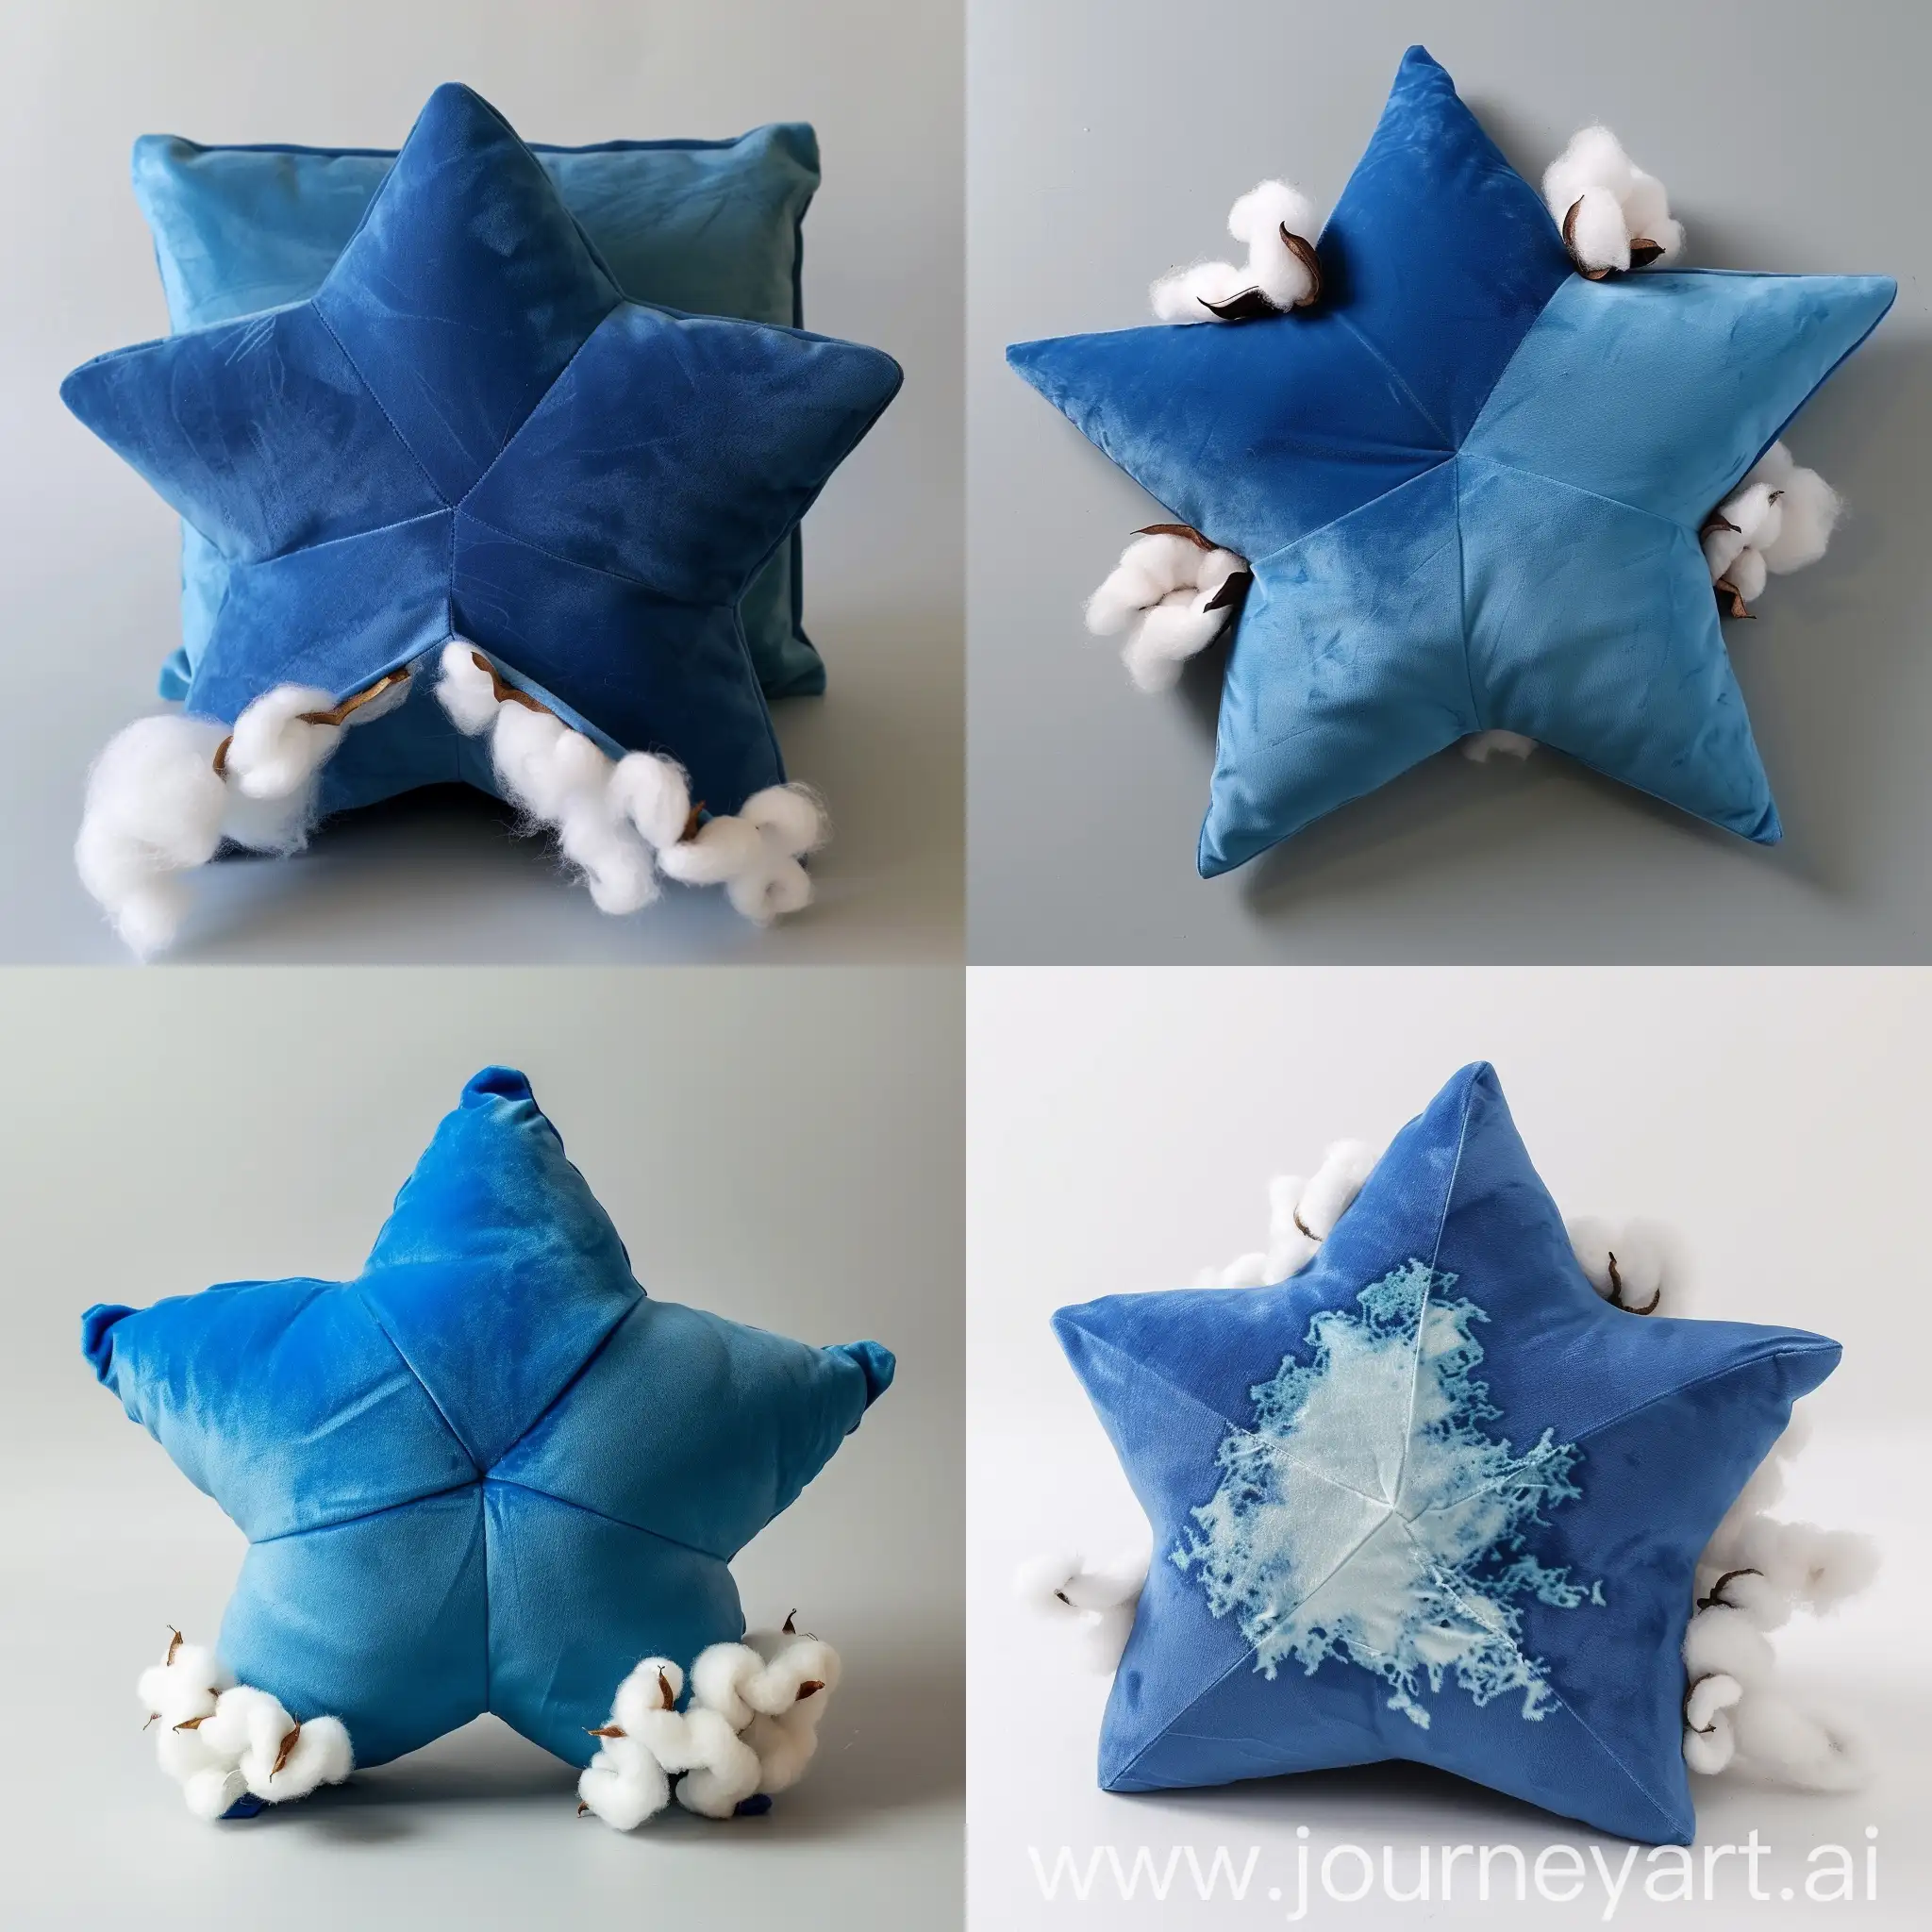 A blue pillow in the shape of a six-pointed star, split and white cotton emerging from it